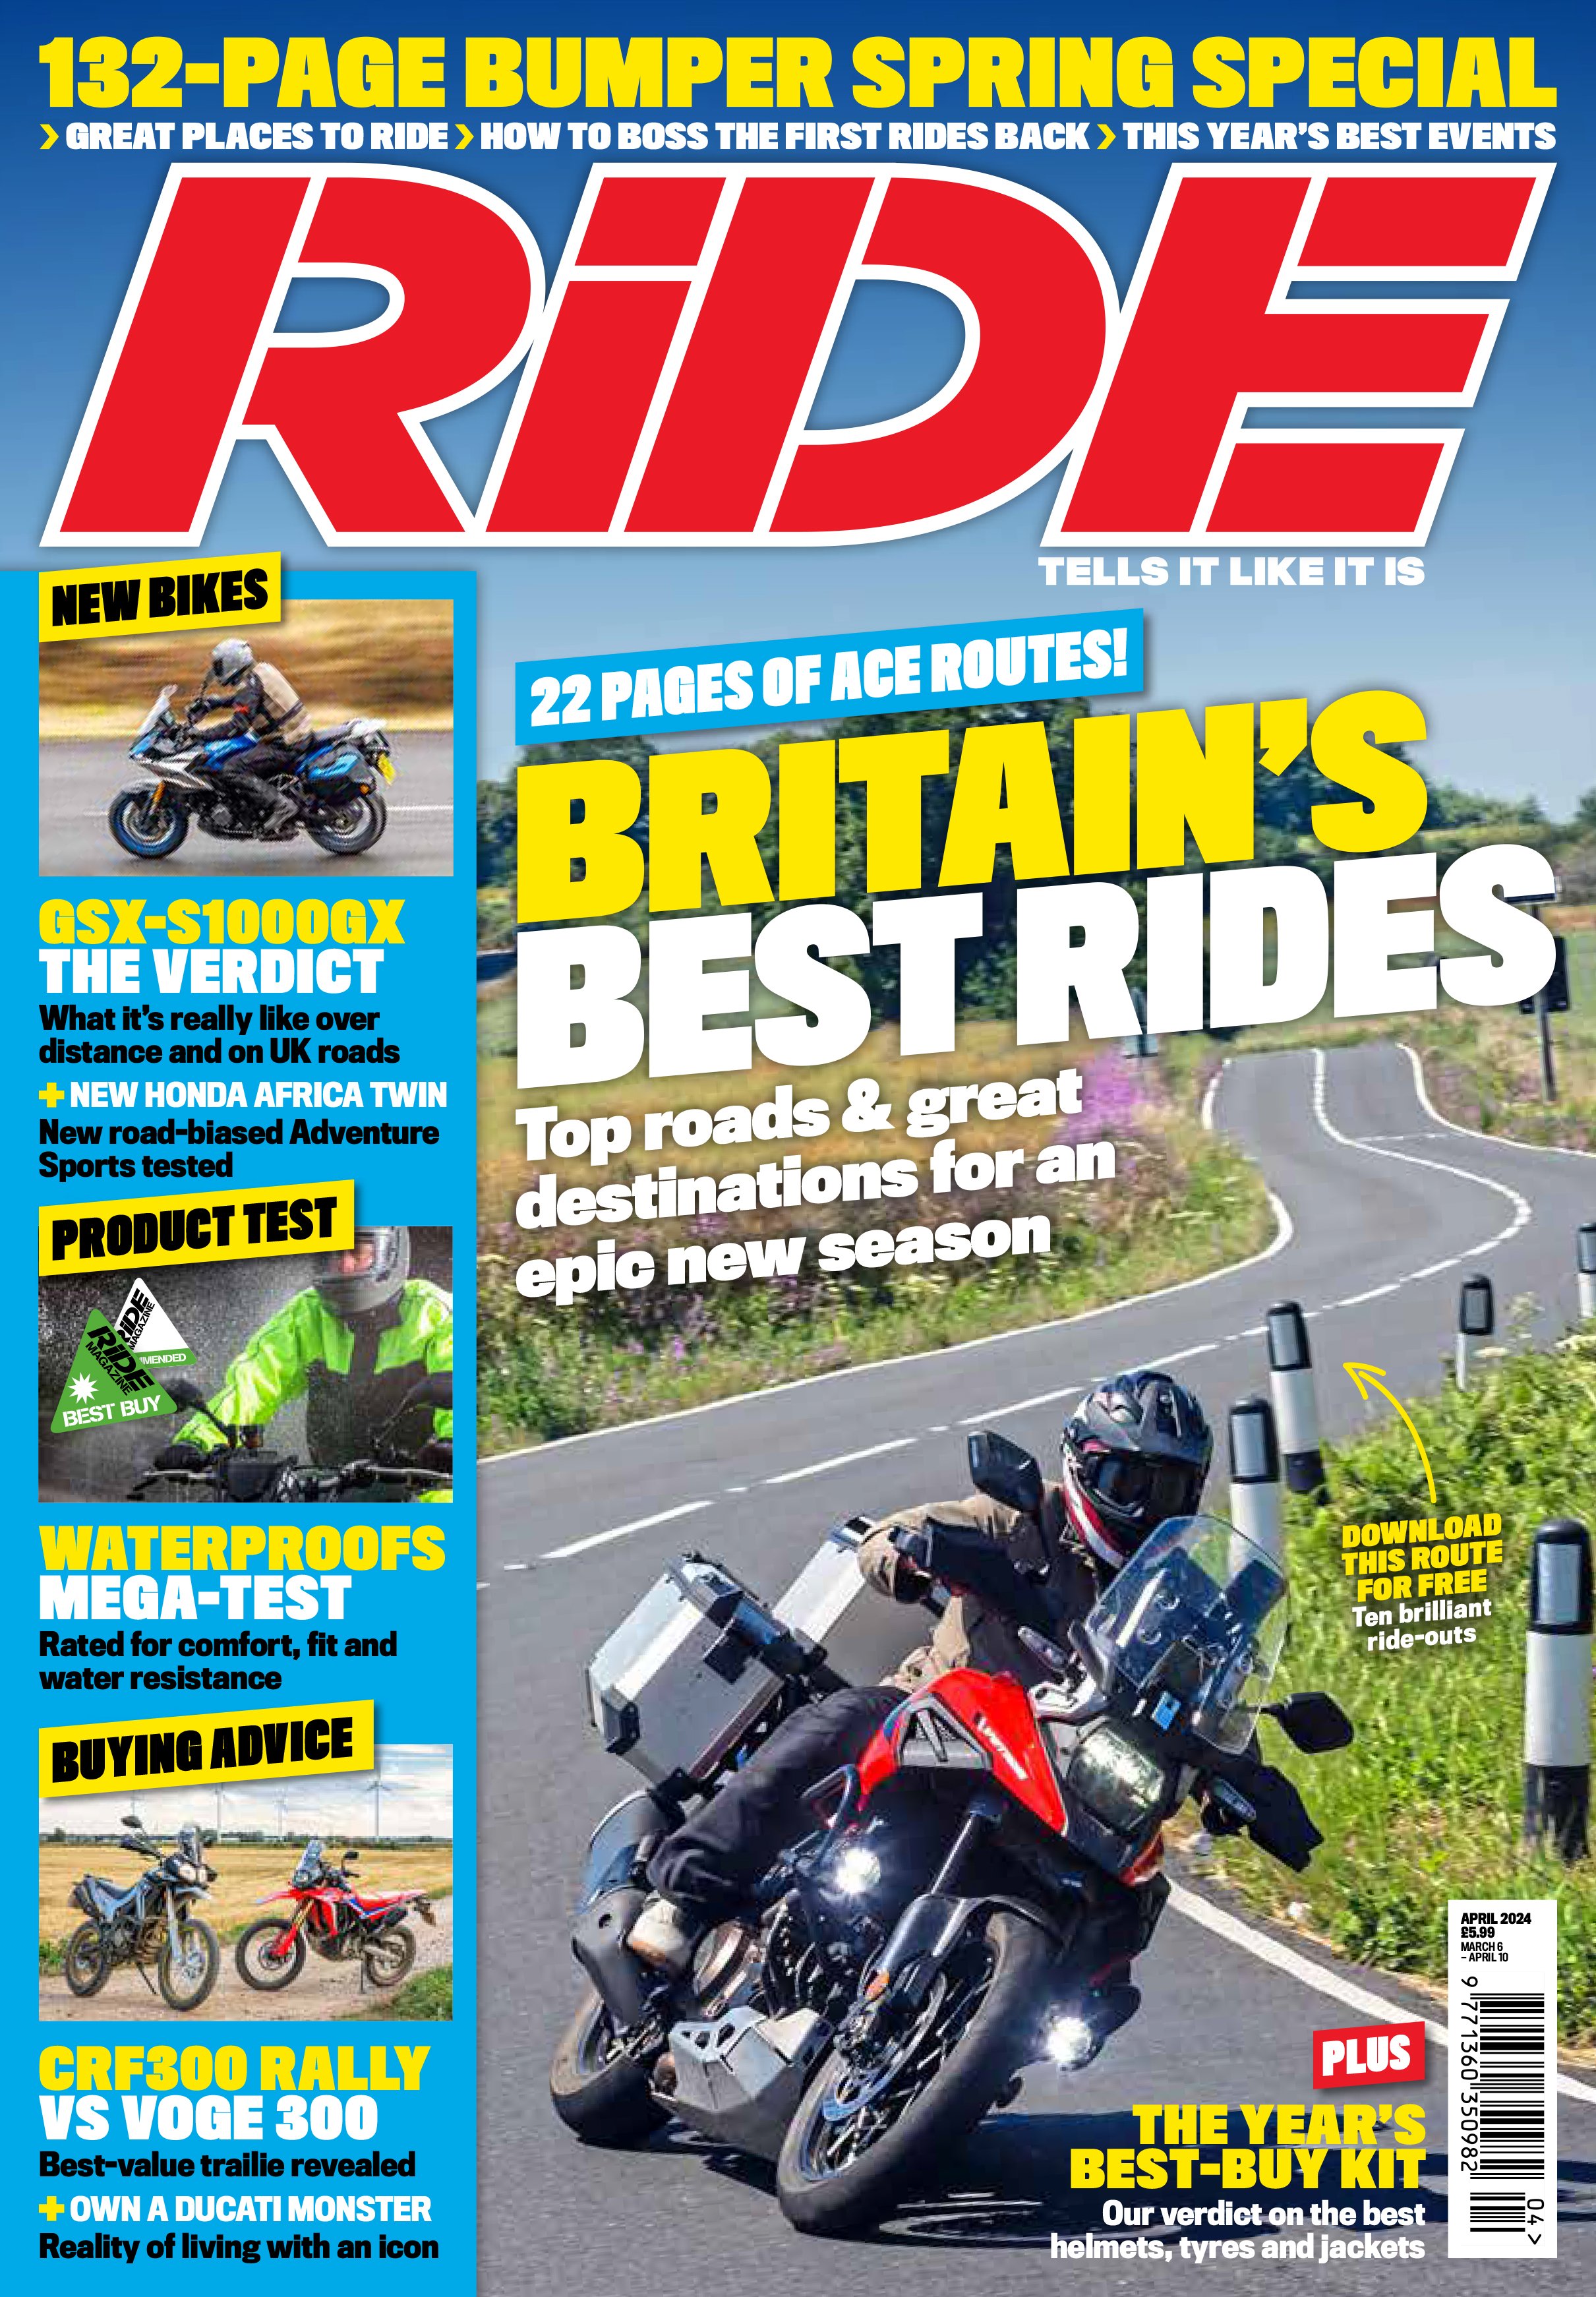 Adventure Riding Gear: The Basics You Need to Get Out There - Page 2 of 2 -  ADV Pulse